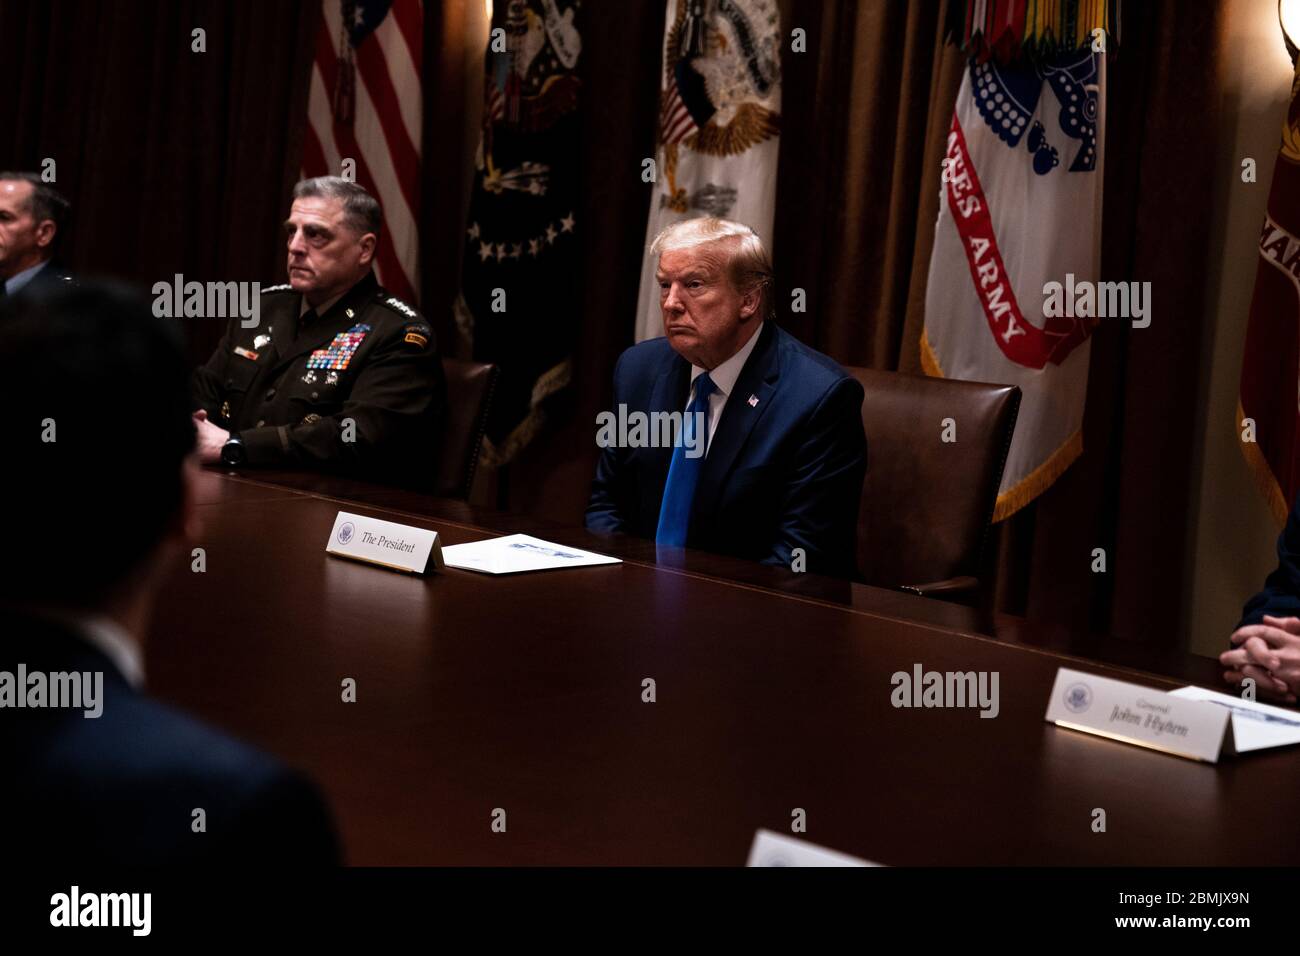 Washington, United States. 09th May, 2020. President Donald Trump participates in a meeting with Senior Military Leadership and the National Security Team in the Cabinet Room of the White House in Washington, DC on Saturday, May 9th, 2020. Pool Photo by Anna Moneymker/UPI Credit: UPI/Alamy Live News Stock Photo